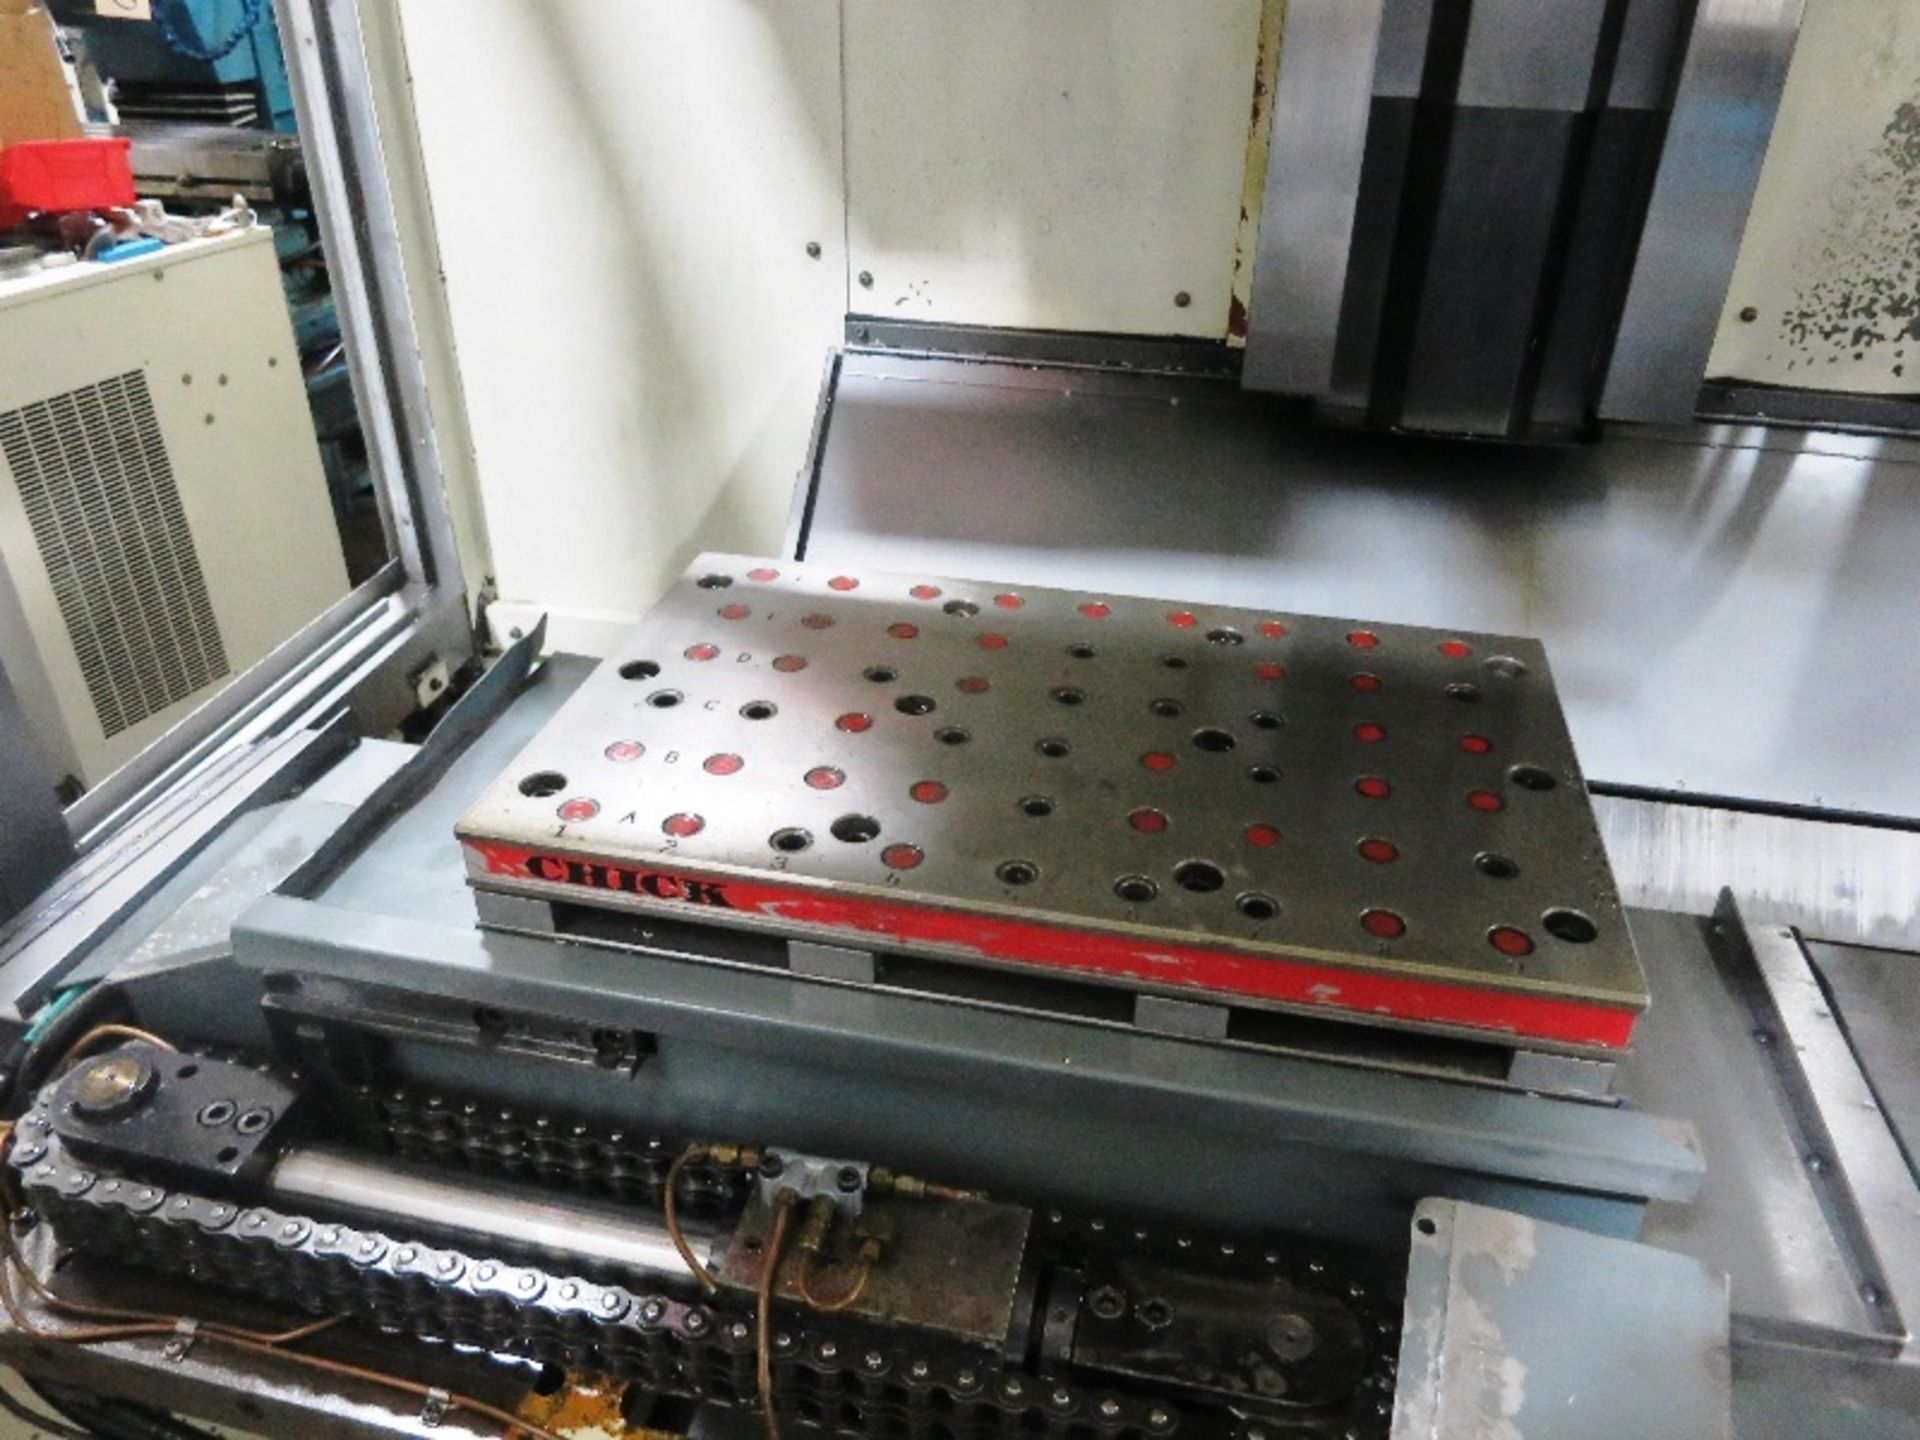 Kitamura Mycenter 1APC CNC Vertical Machining Center w/High Speed Automatic pallet Changer, S/N 0258 - Image 3 of 10